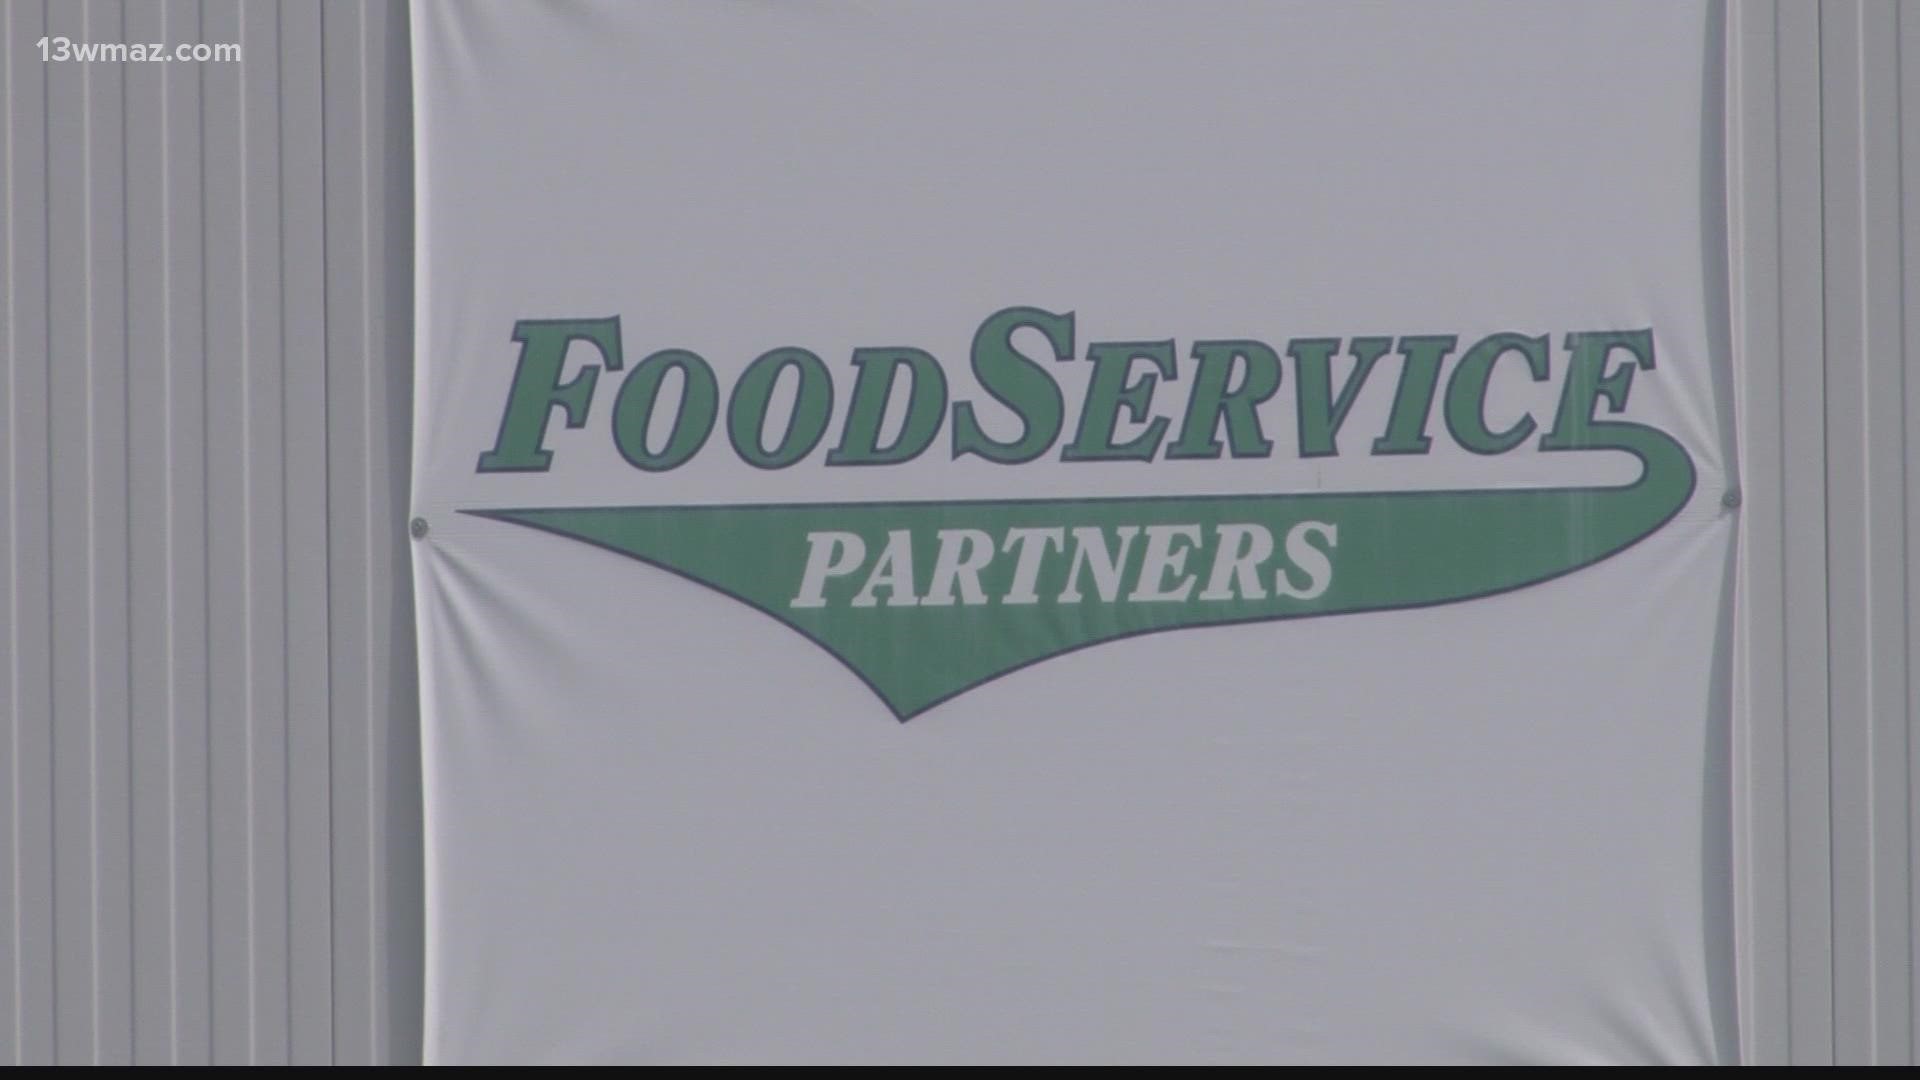 The company, FoodService Partners, filed for chapter 11 bankruptcy last month and the Milledgeville office closed its doors last Friday.